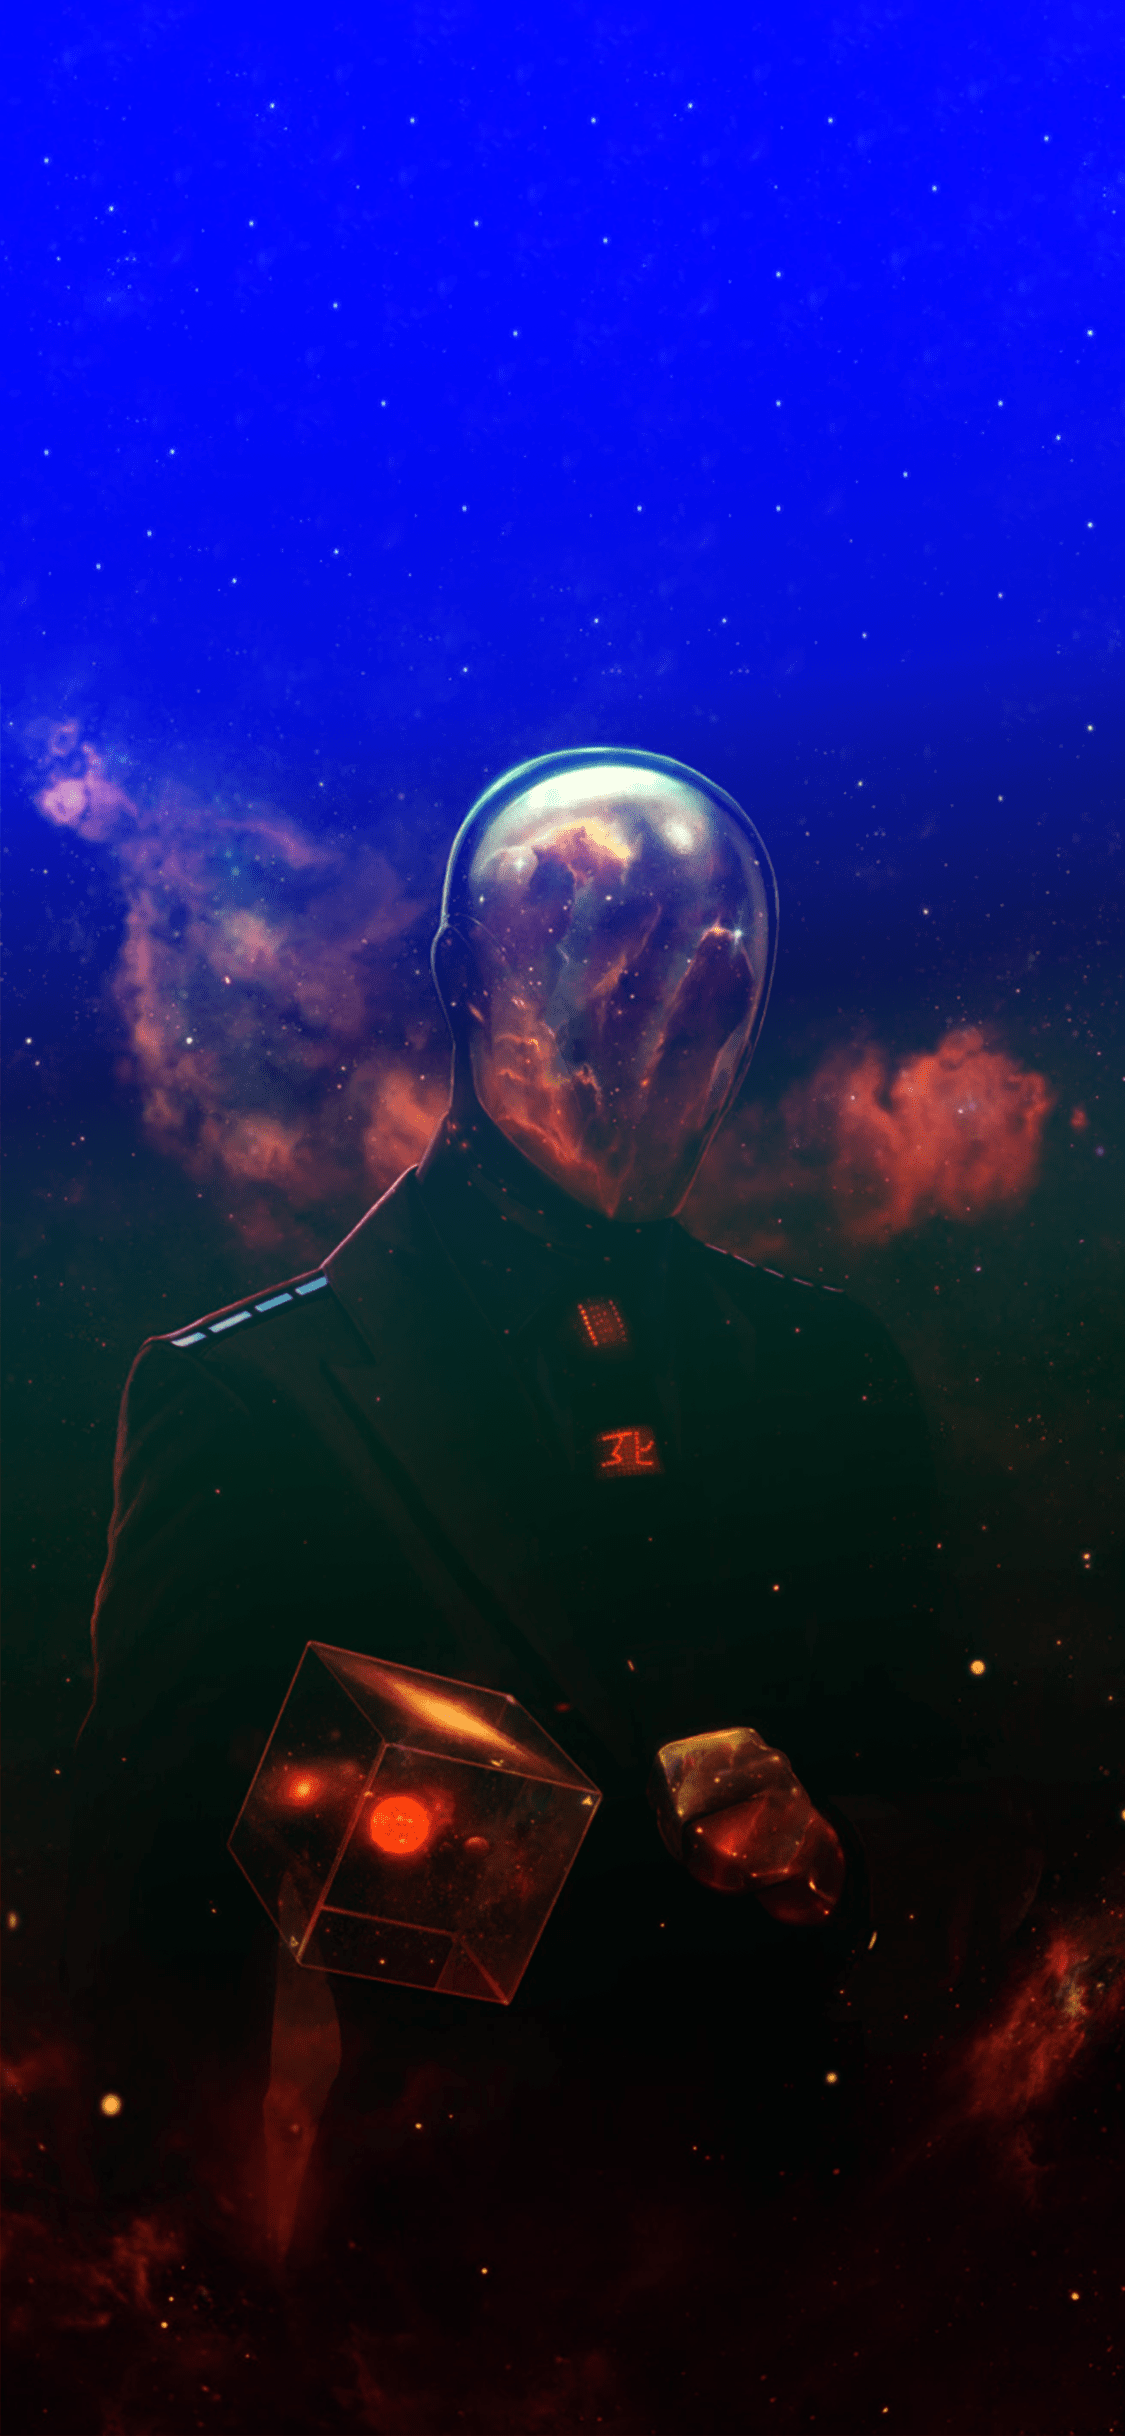 A person with a helmet and a box, standing in space with clouds - Space, cool